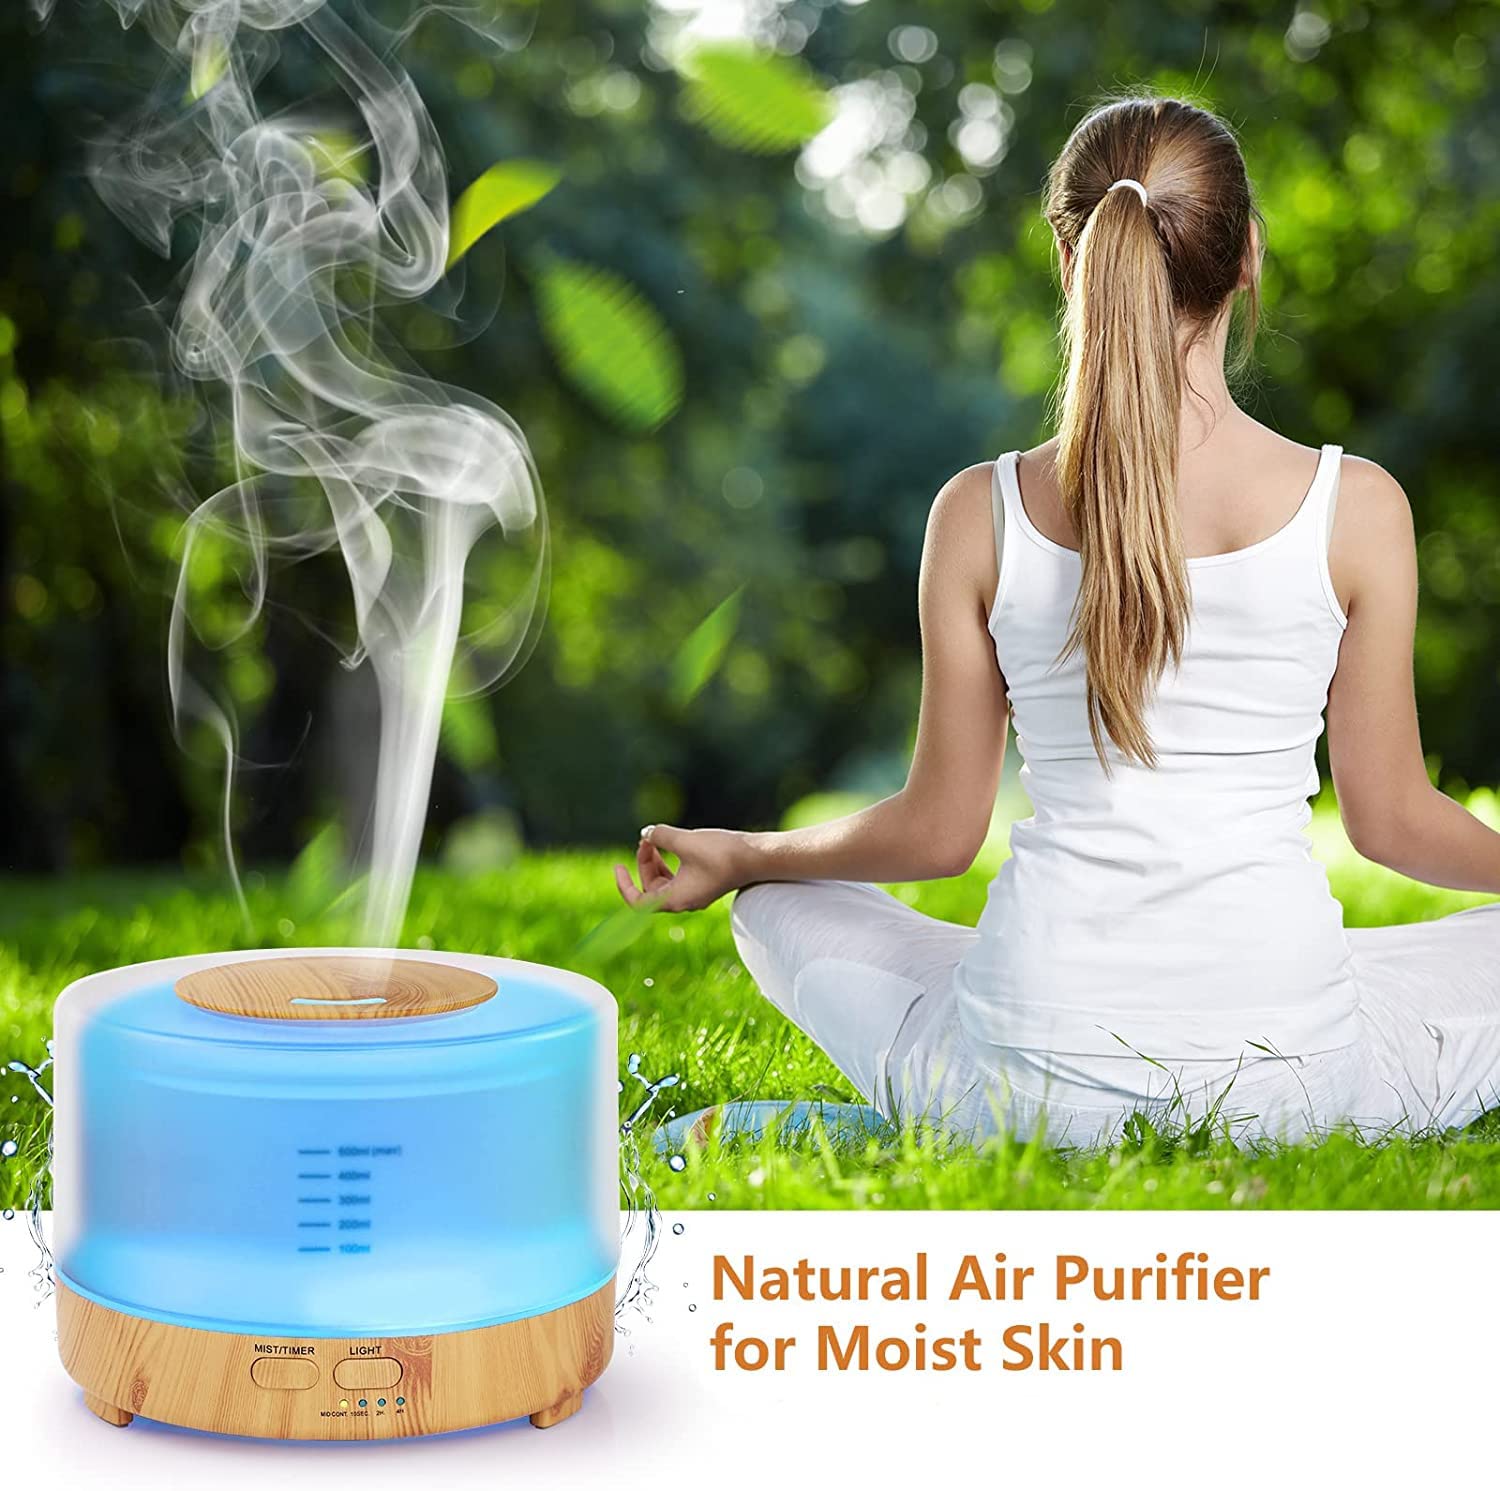 SKY-TOUCH Essential Oil Aroma Diffuser 700ml, Upgraded Aromatherapy Diffuser 7 Color Lights, Cool Mist Humidifier with Auto Shut-off Function, Diffuser for Home Bedroom Office موزع زيوت عطرية علاجية مطور سعة 700  مل، مرطب رذاذ بارد سكاي-تاتش، اصفر